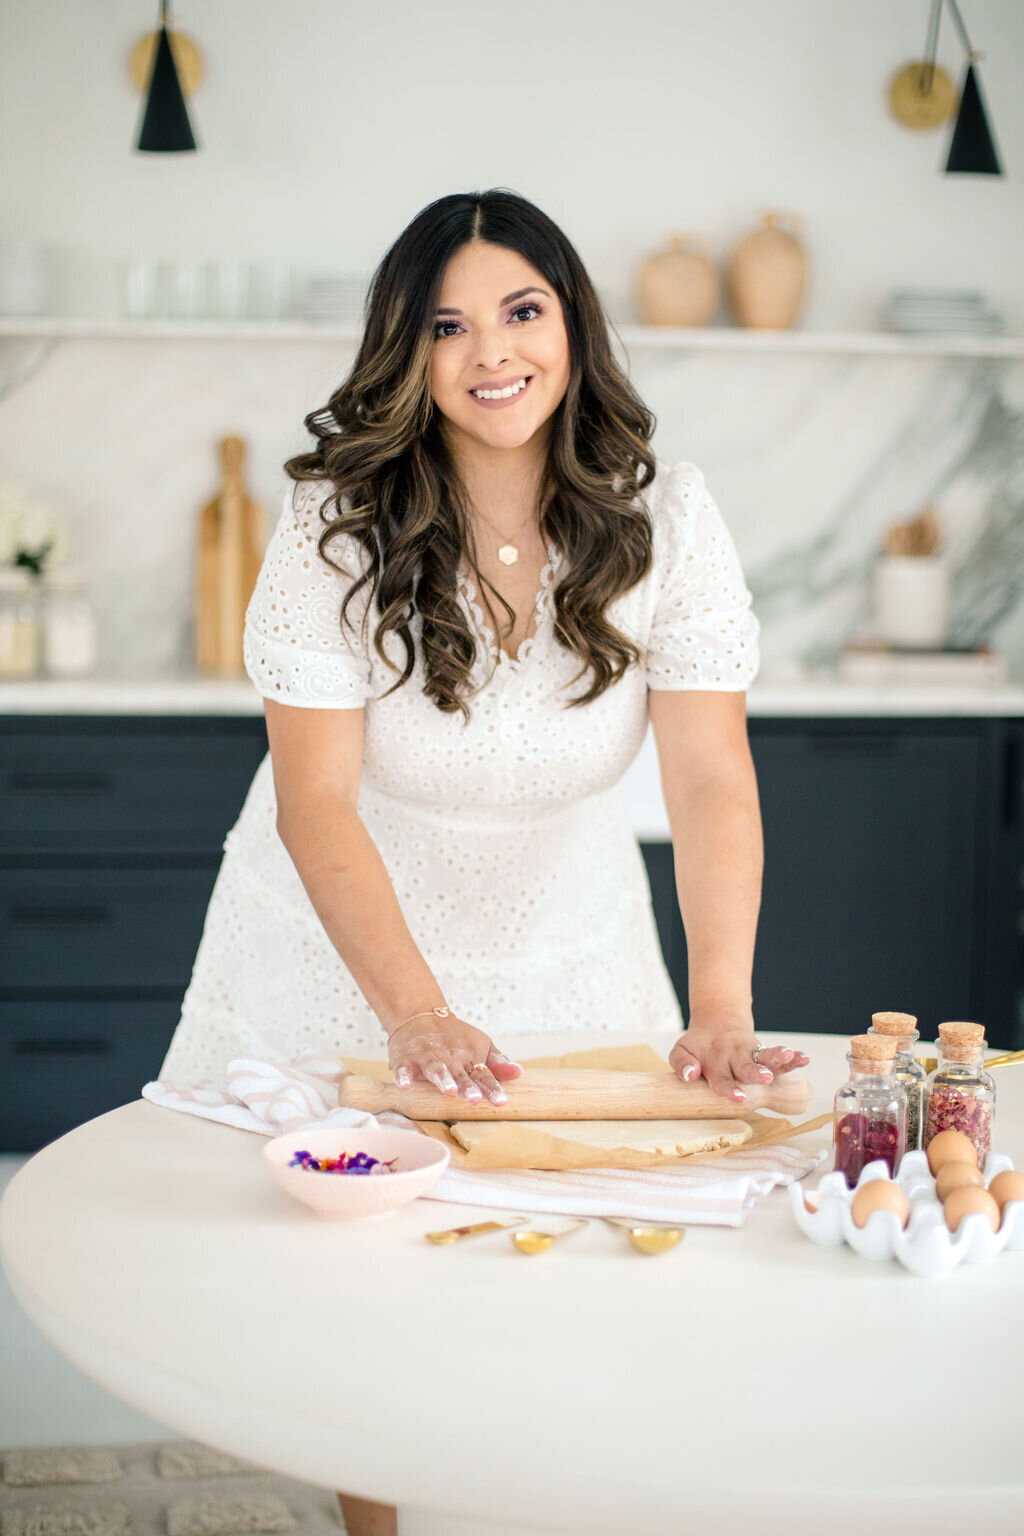 woman rolling out dough with petals, eggs, and tools spread out on table